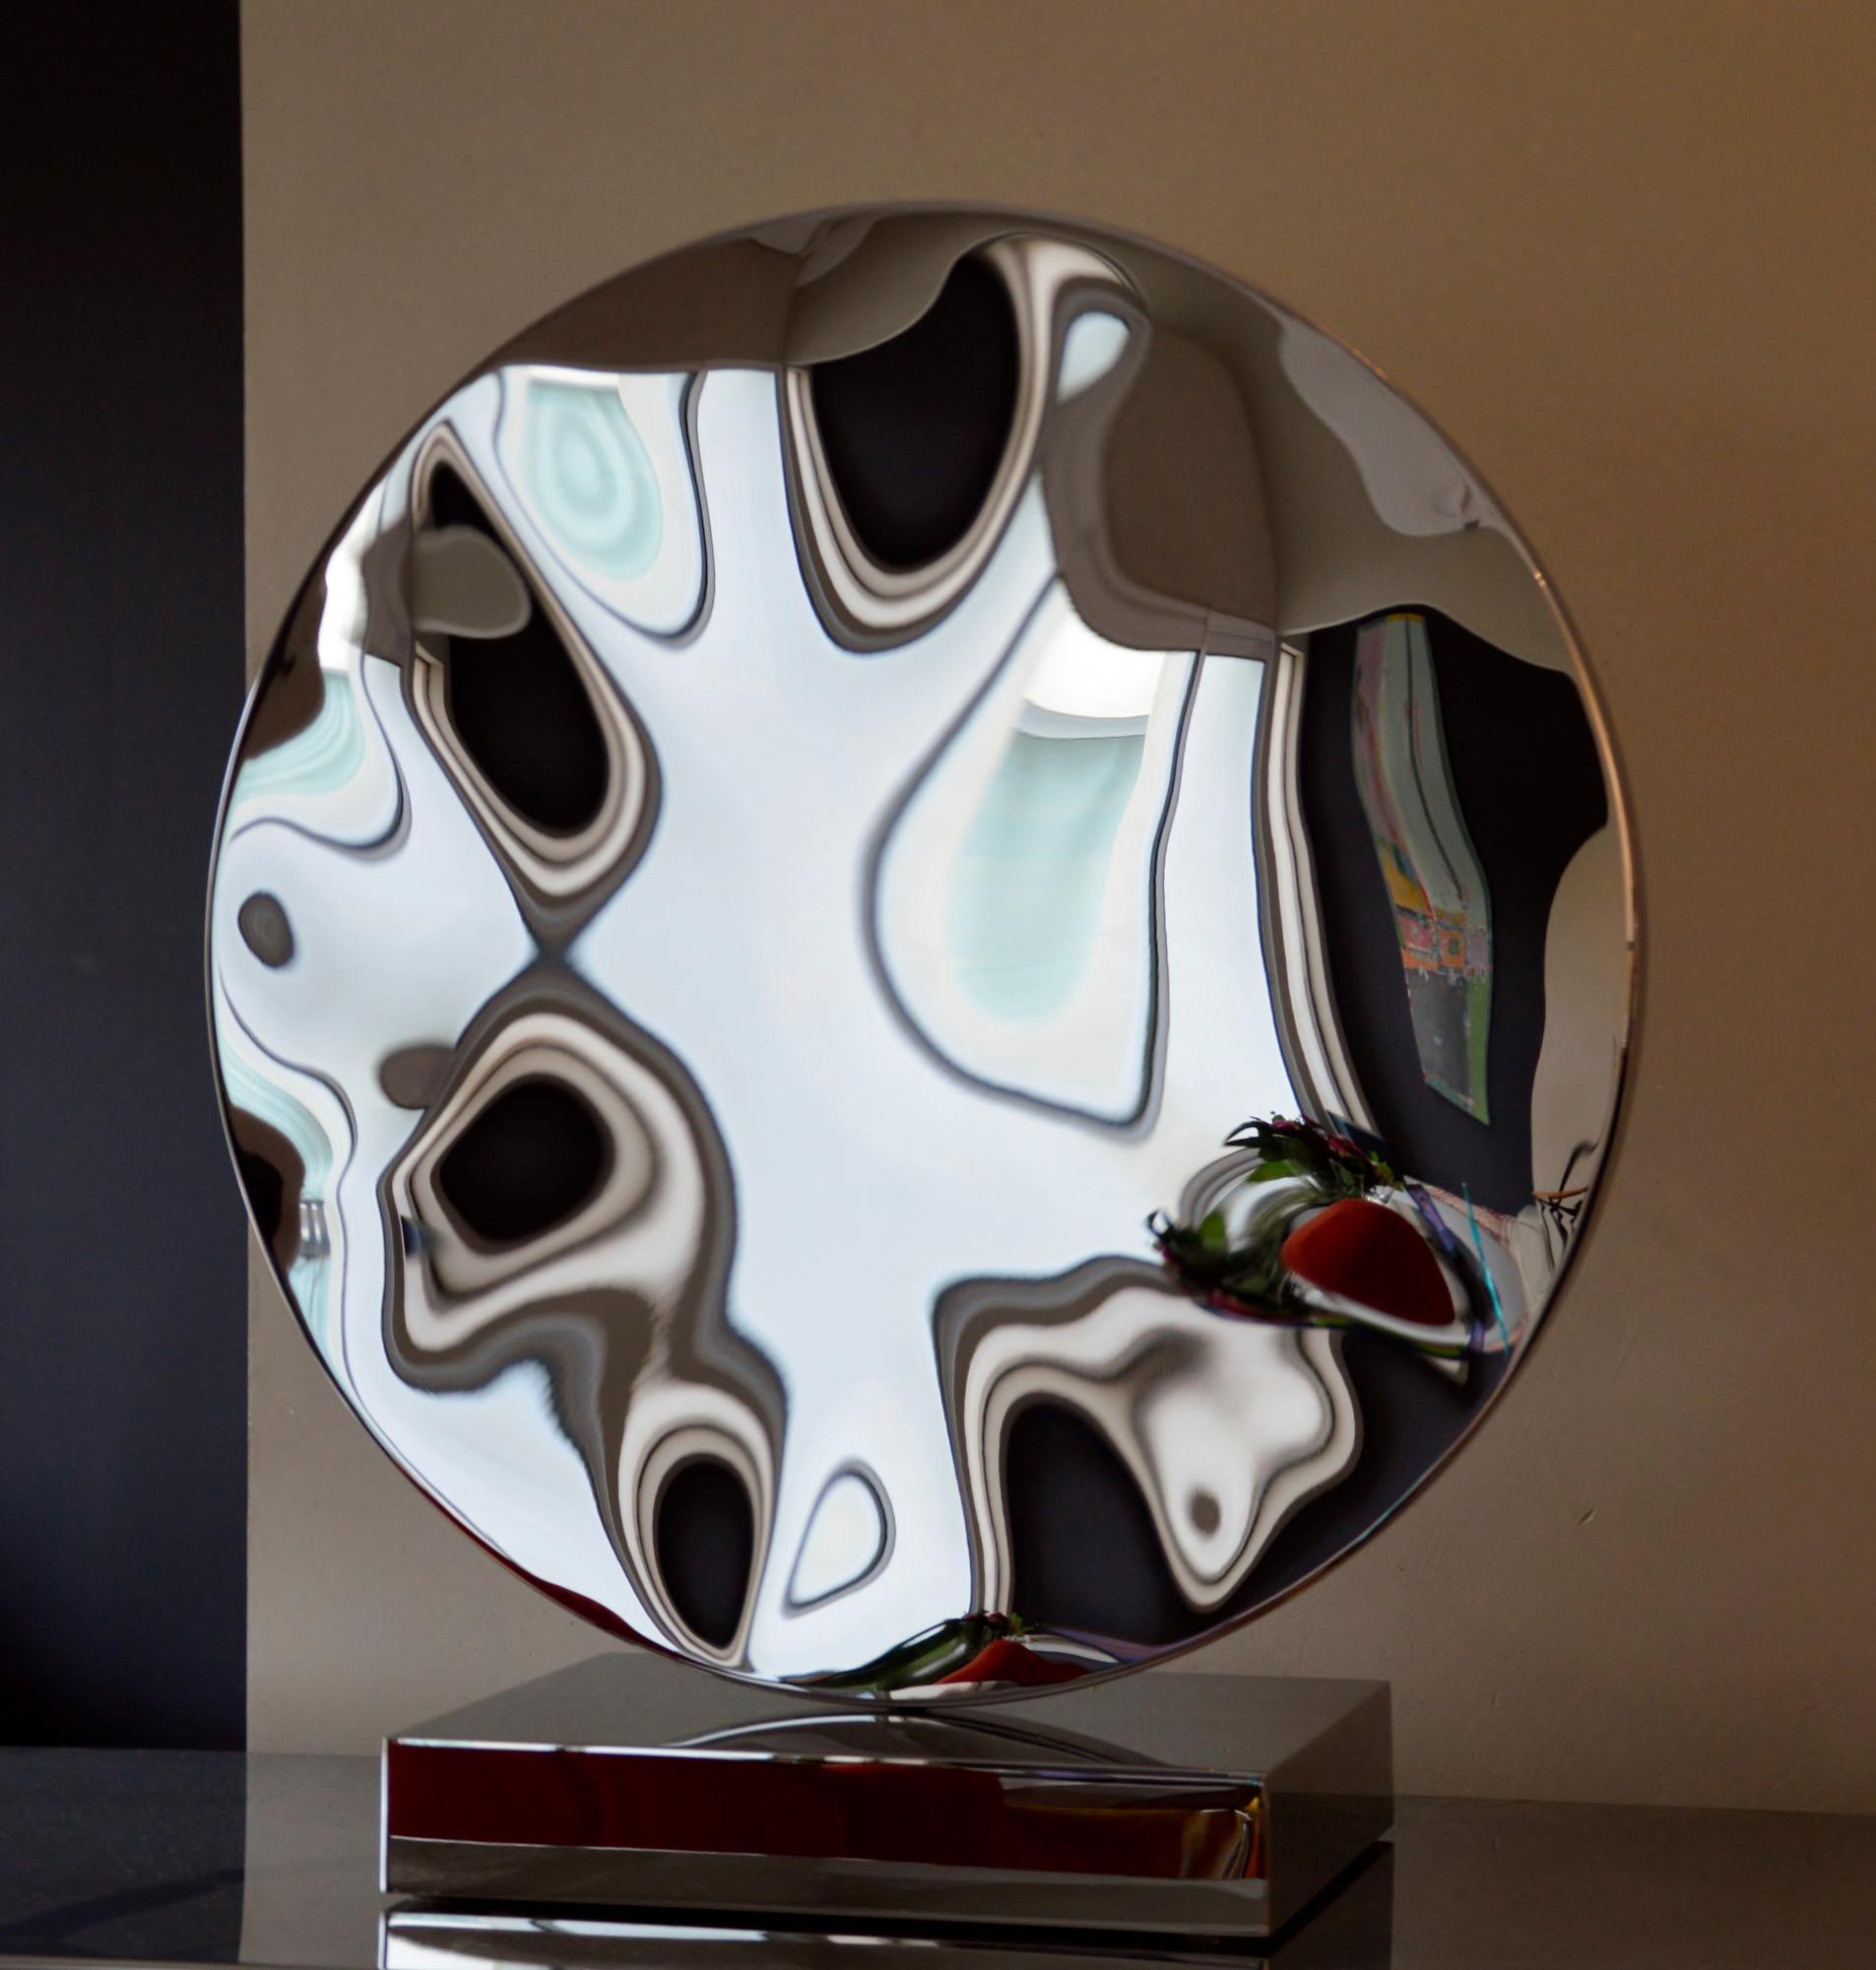 “Shattered” mirror I by Franck K - Stainless steel sculpture, reflection, light